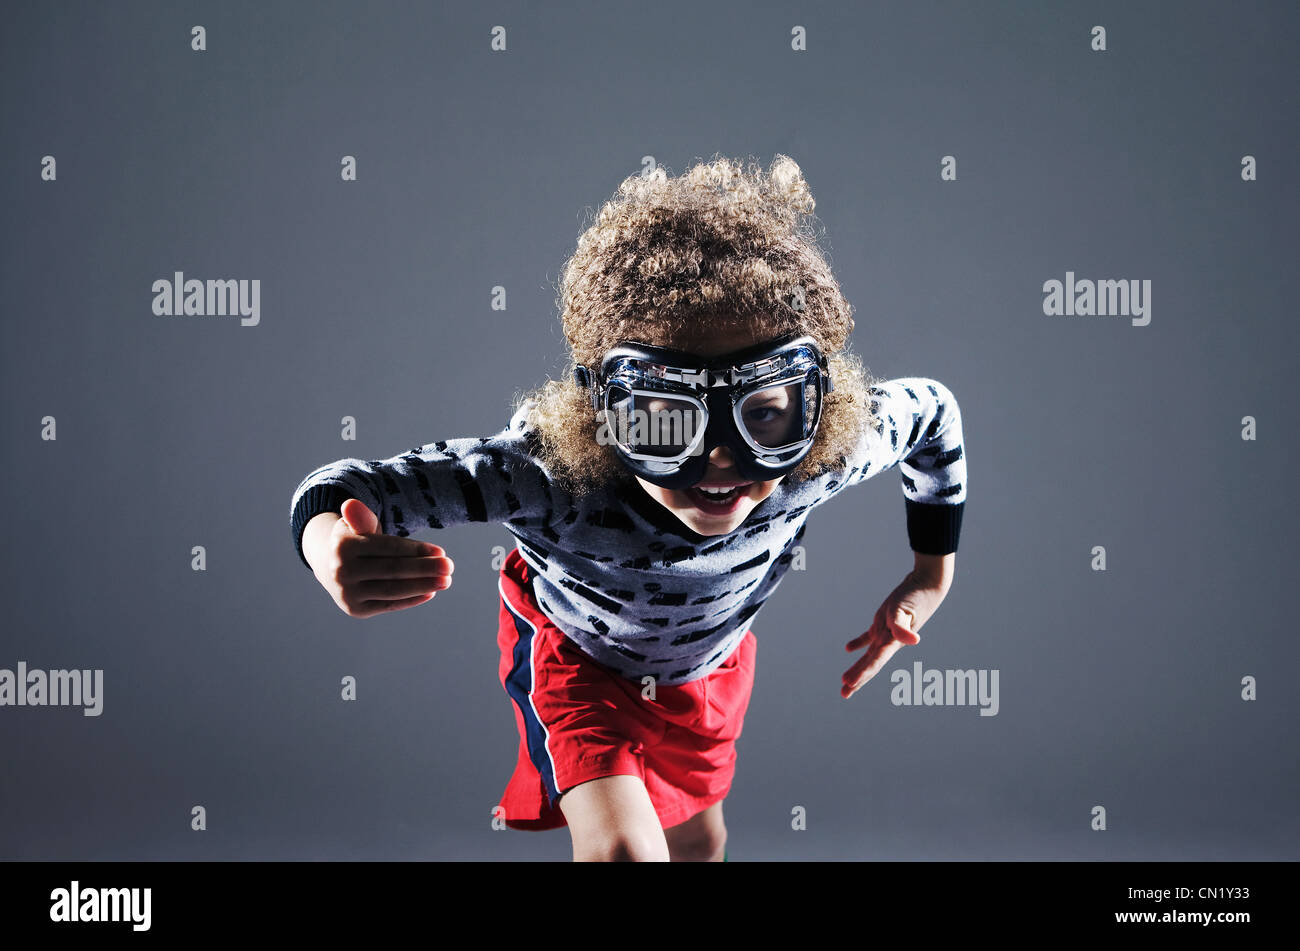 Young boy with flying goggles Stock Photo